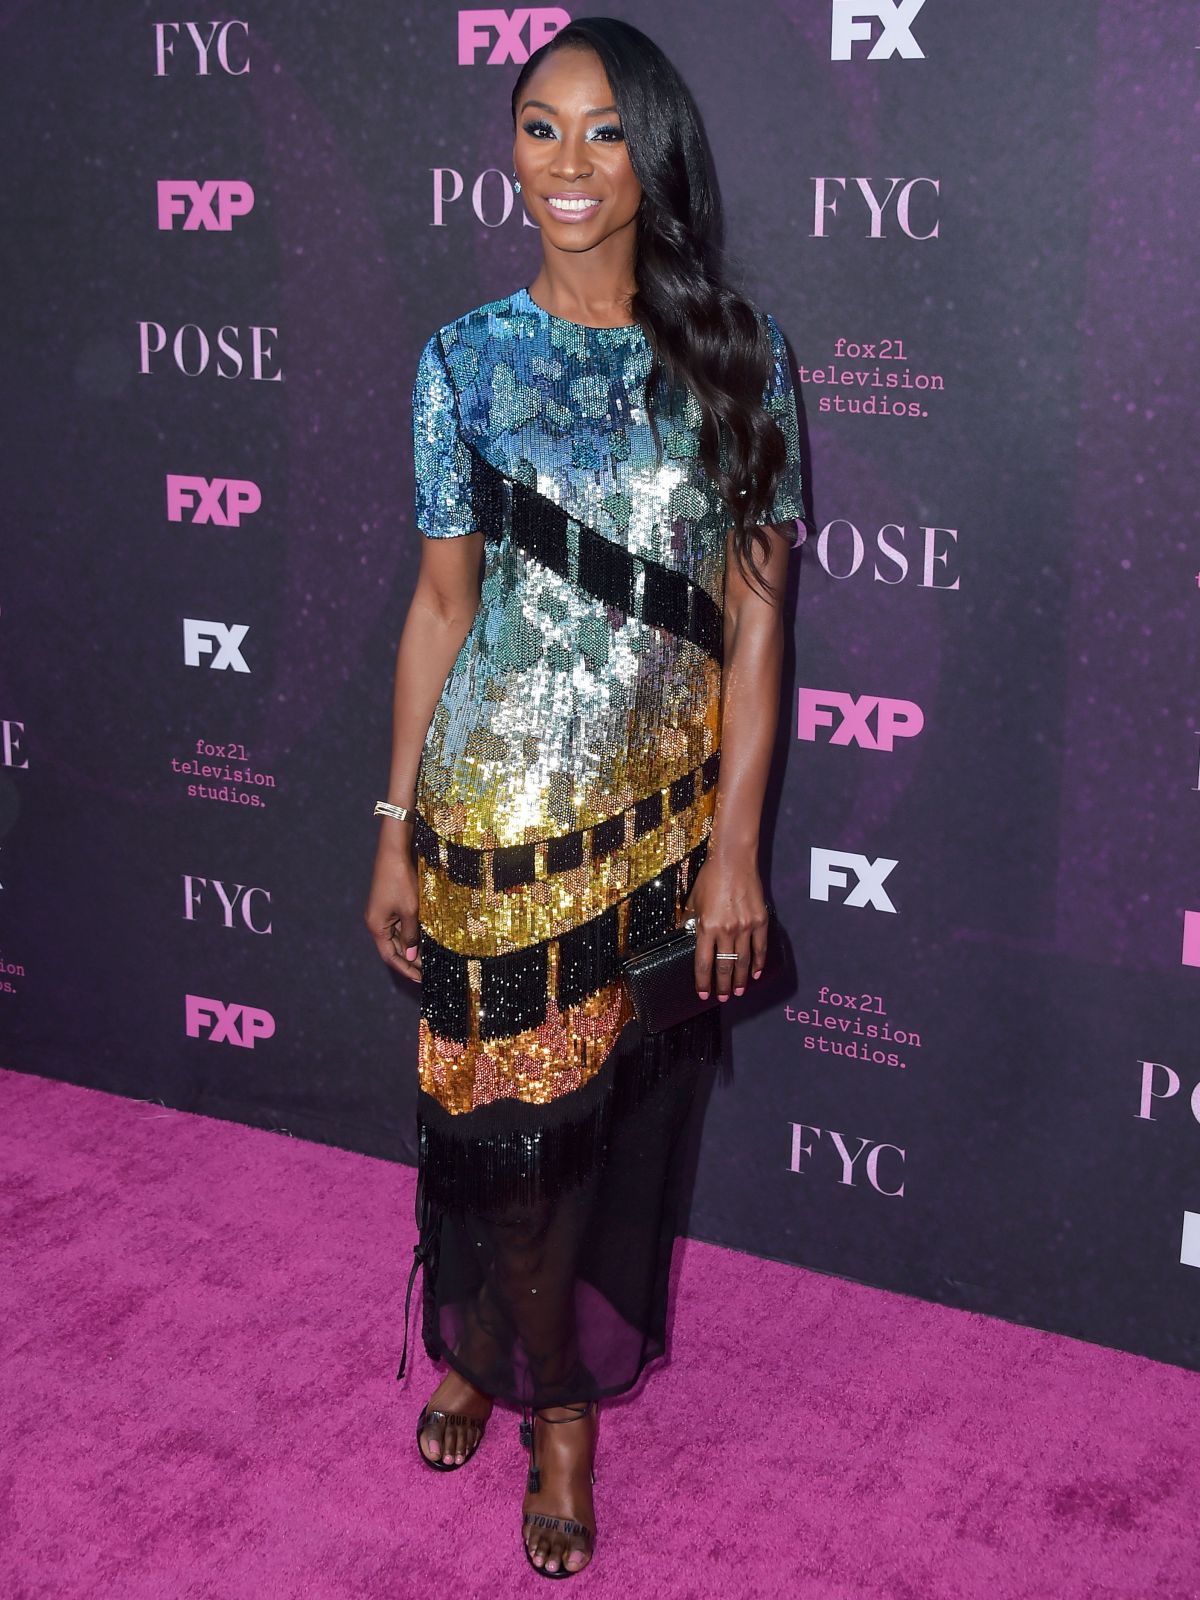 ANGELICA ROSS at Pose Premiere in Los Angeles 08/09/2019 – HawtCelebs